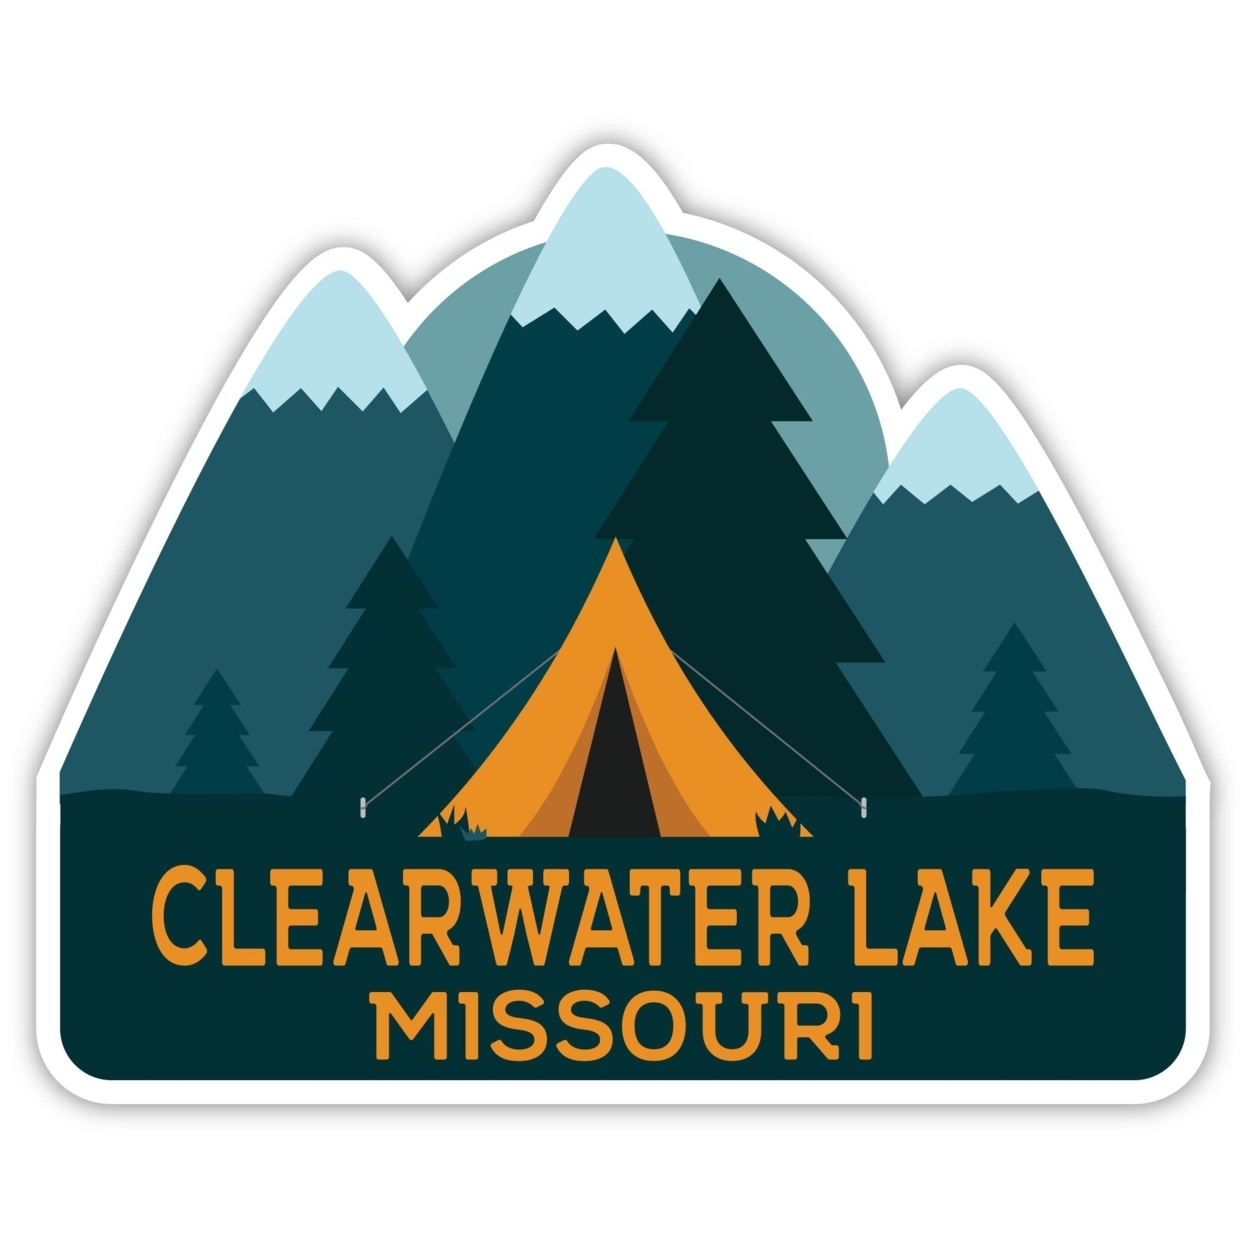 Clearwater Lake Missouri Souvenir Decorative Stickers (Choose Theme And Size) - 4-Pack, 12-Inch, Tent